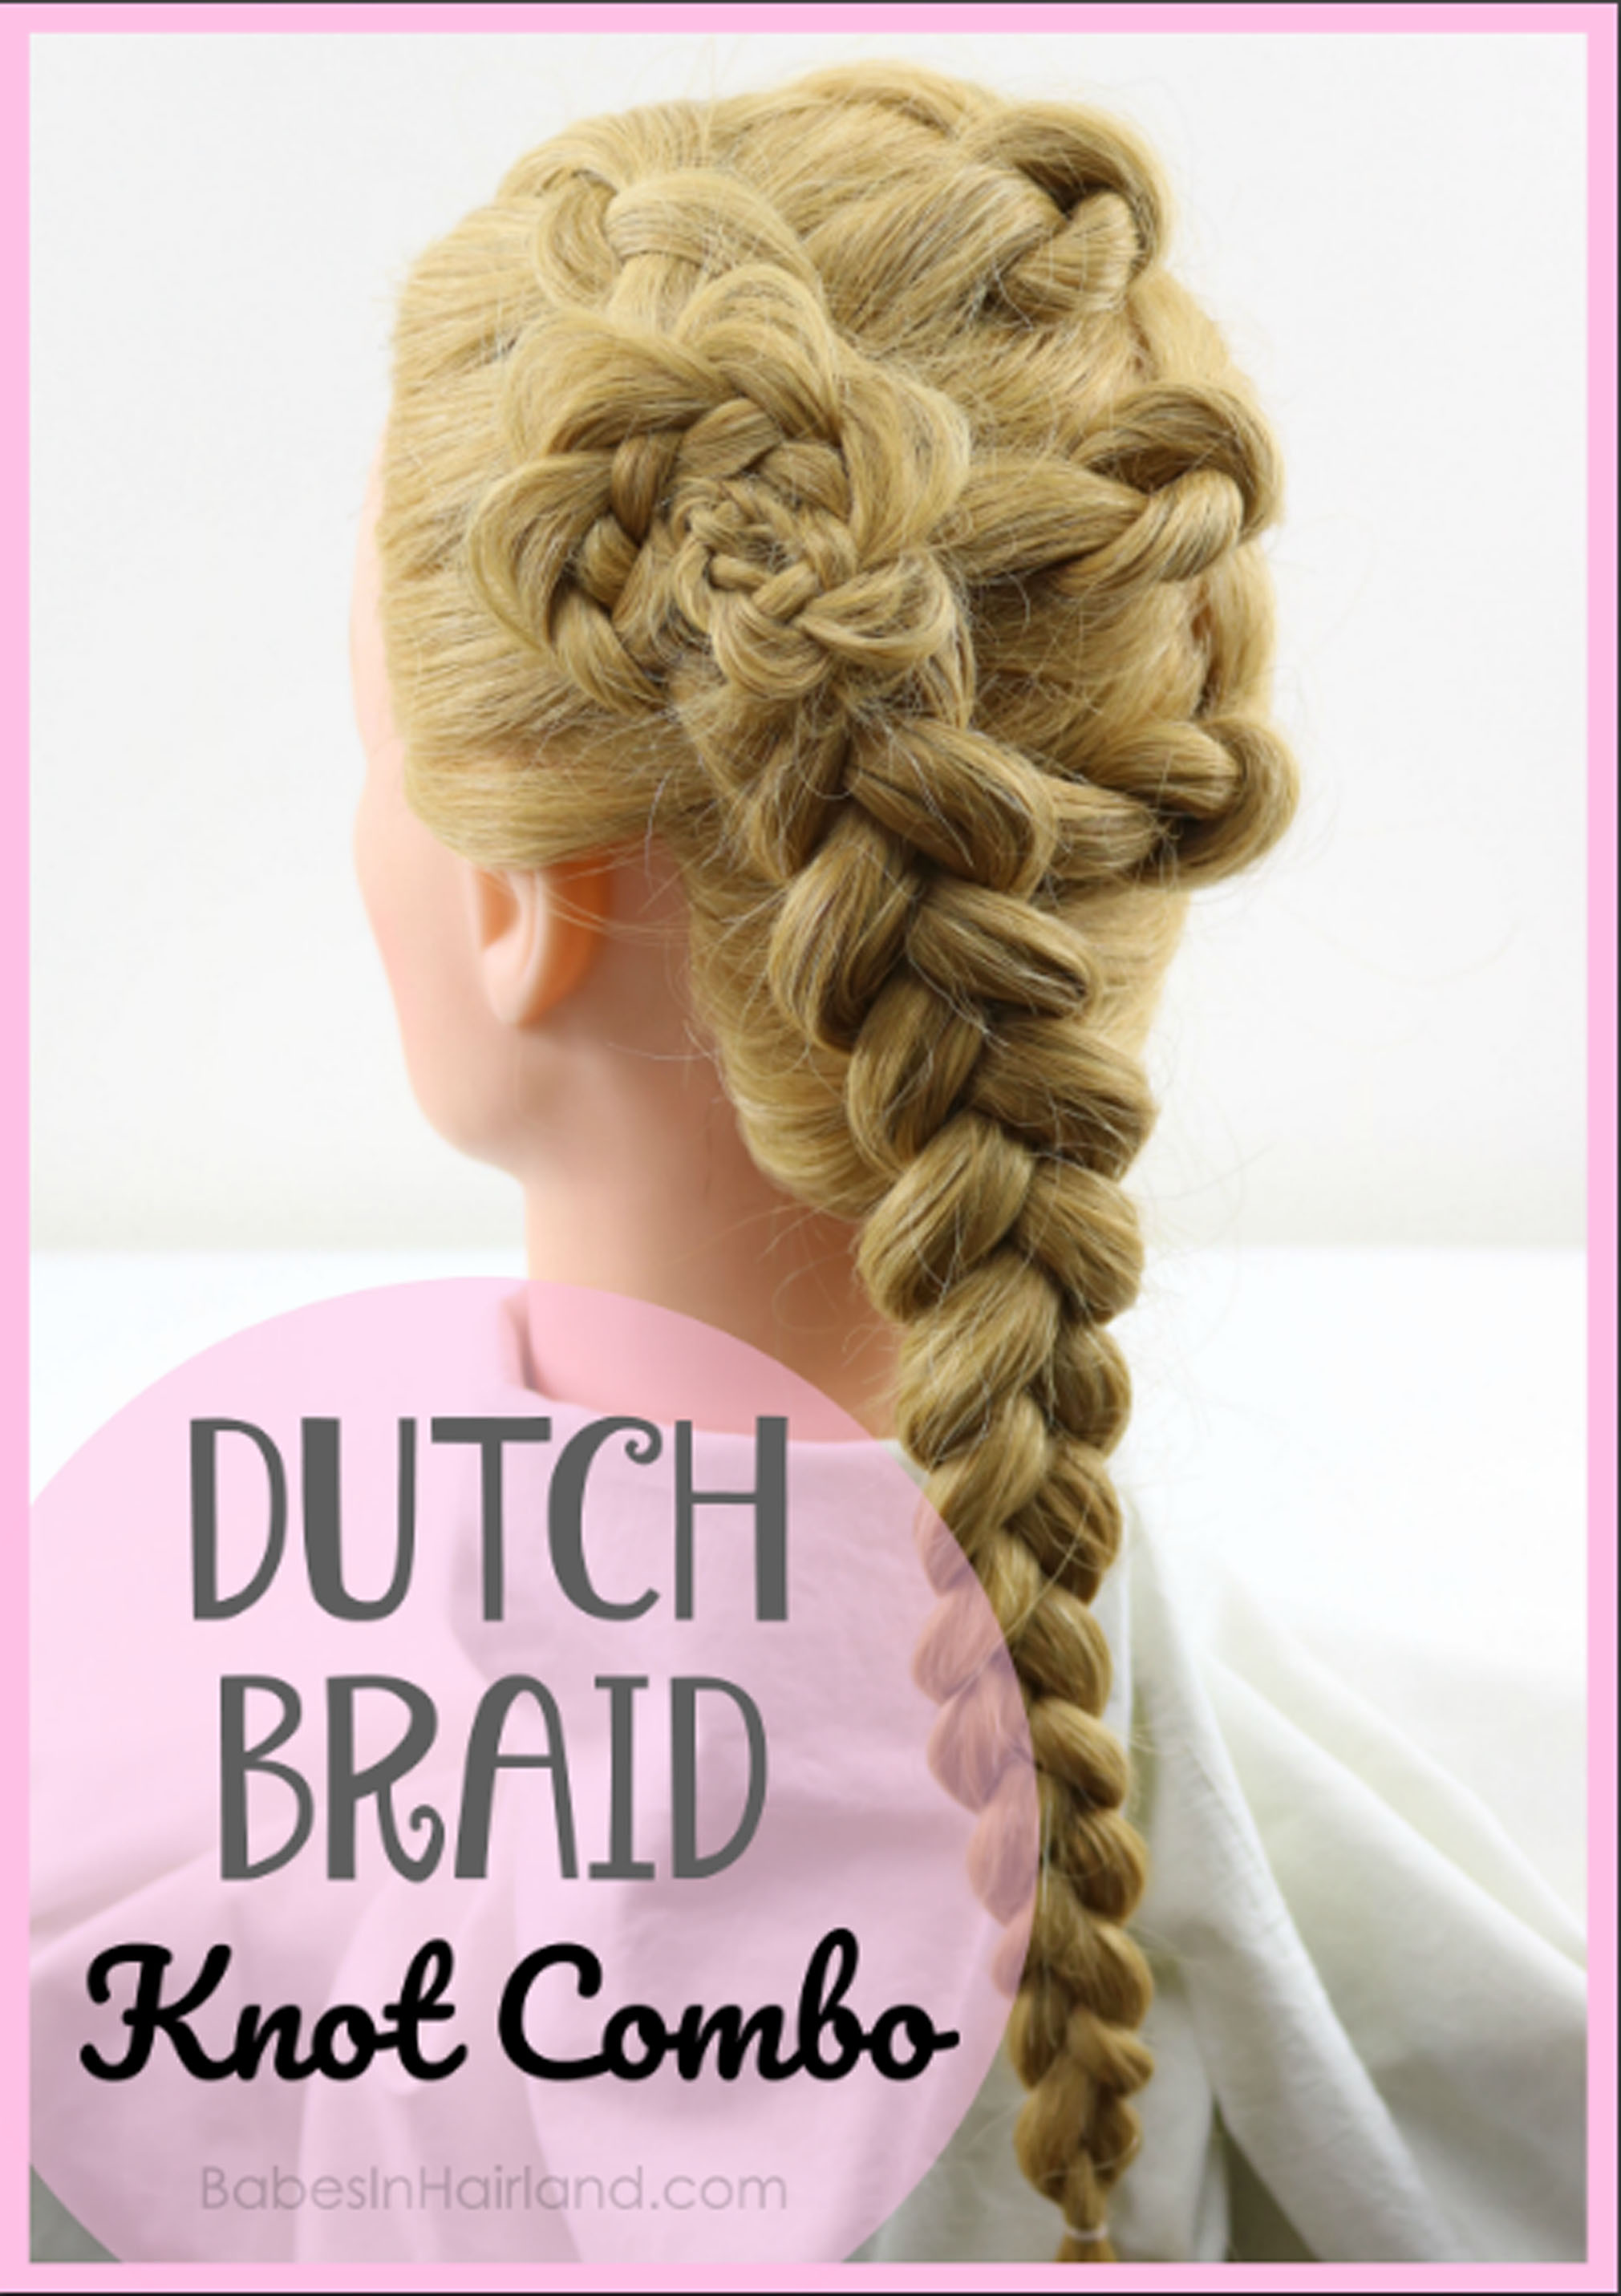 Dutch Braid Knot Combo Hairstyle  A Combination of Hair Techniques